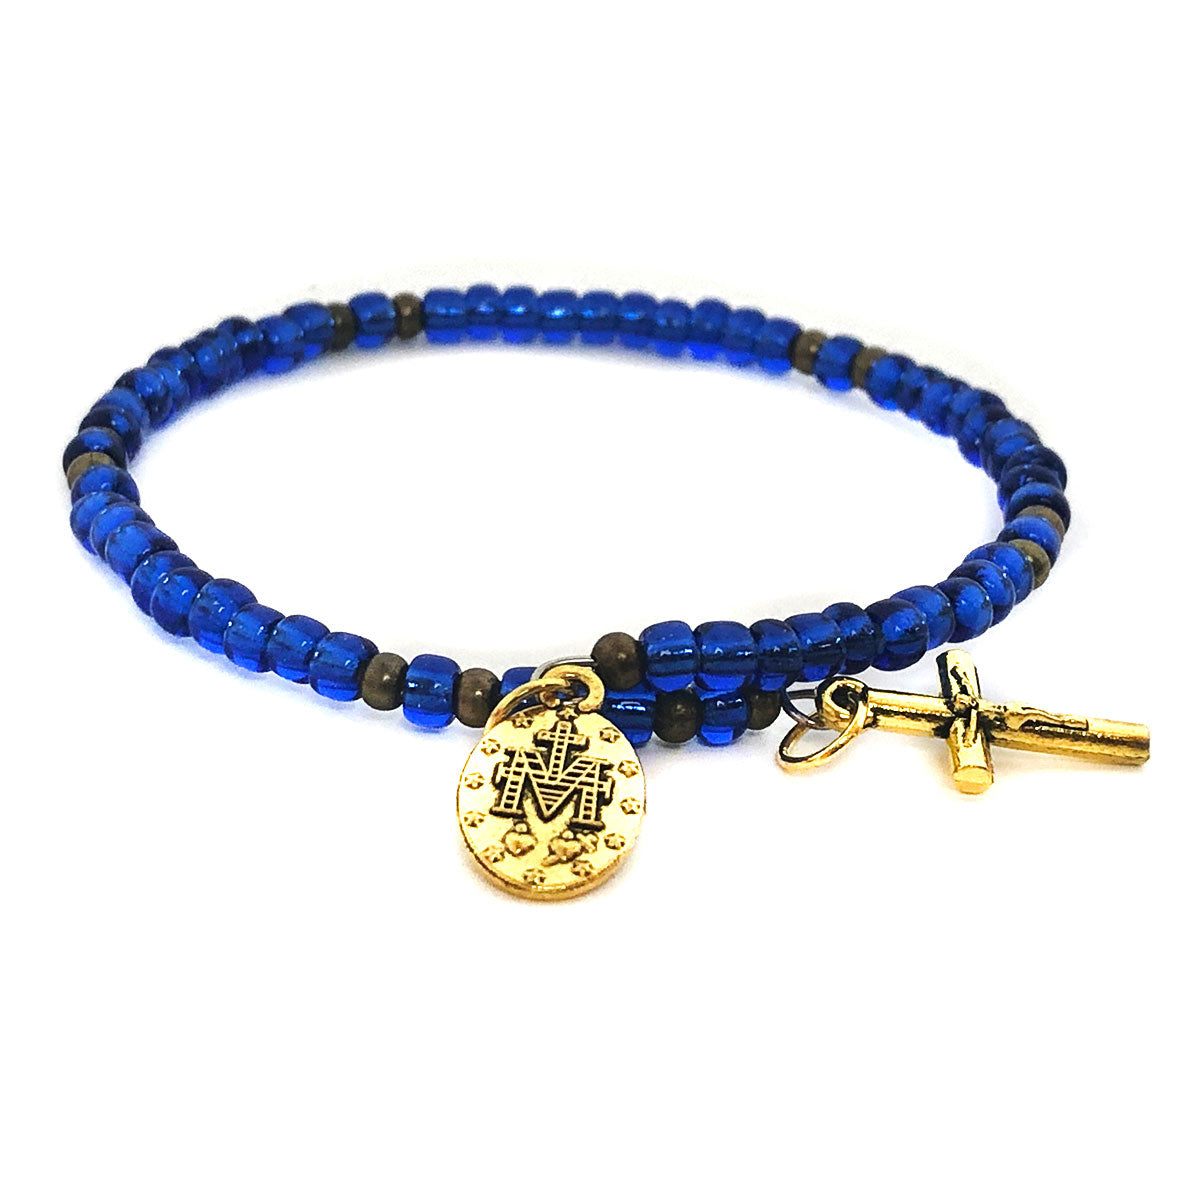 Miraculous Medal Blue Lapis Lazuli Front Toggle Clasp Necklace and Rosary Bracelet Set by DALIA LORRAINE